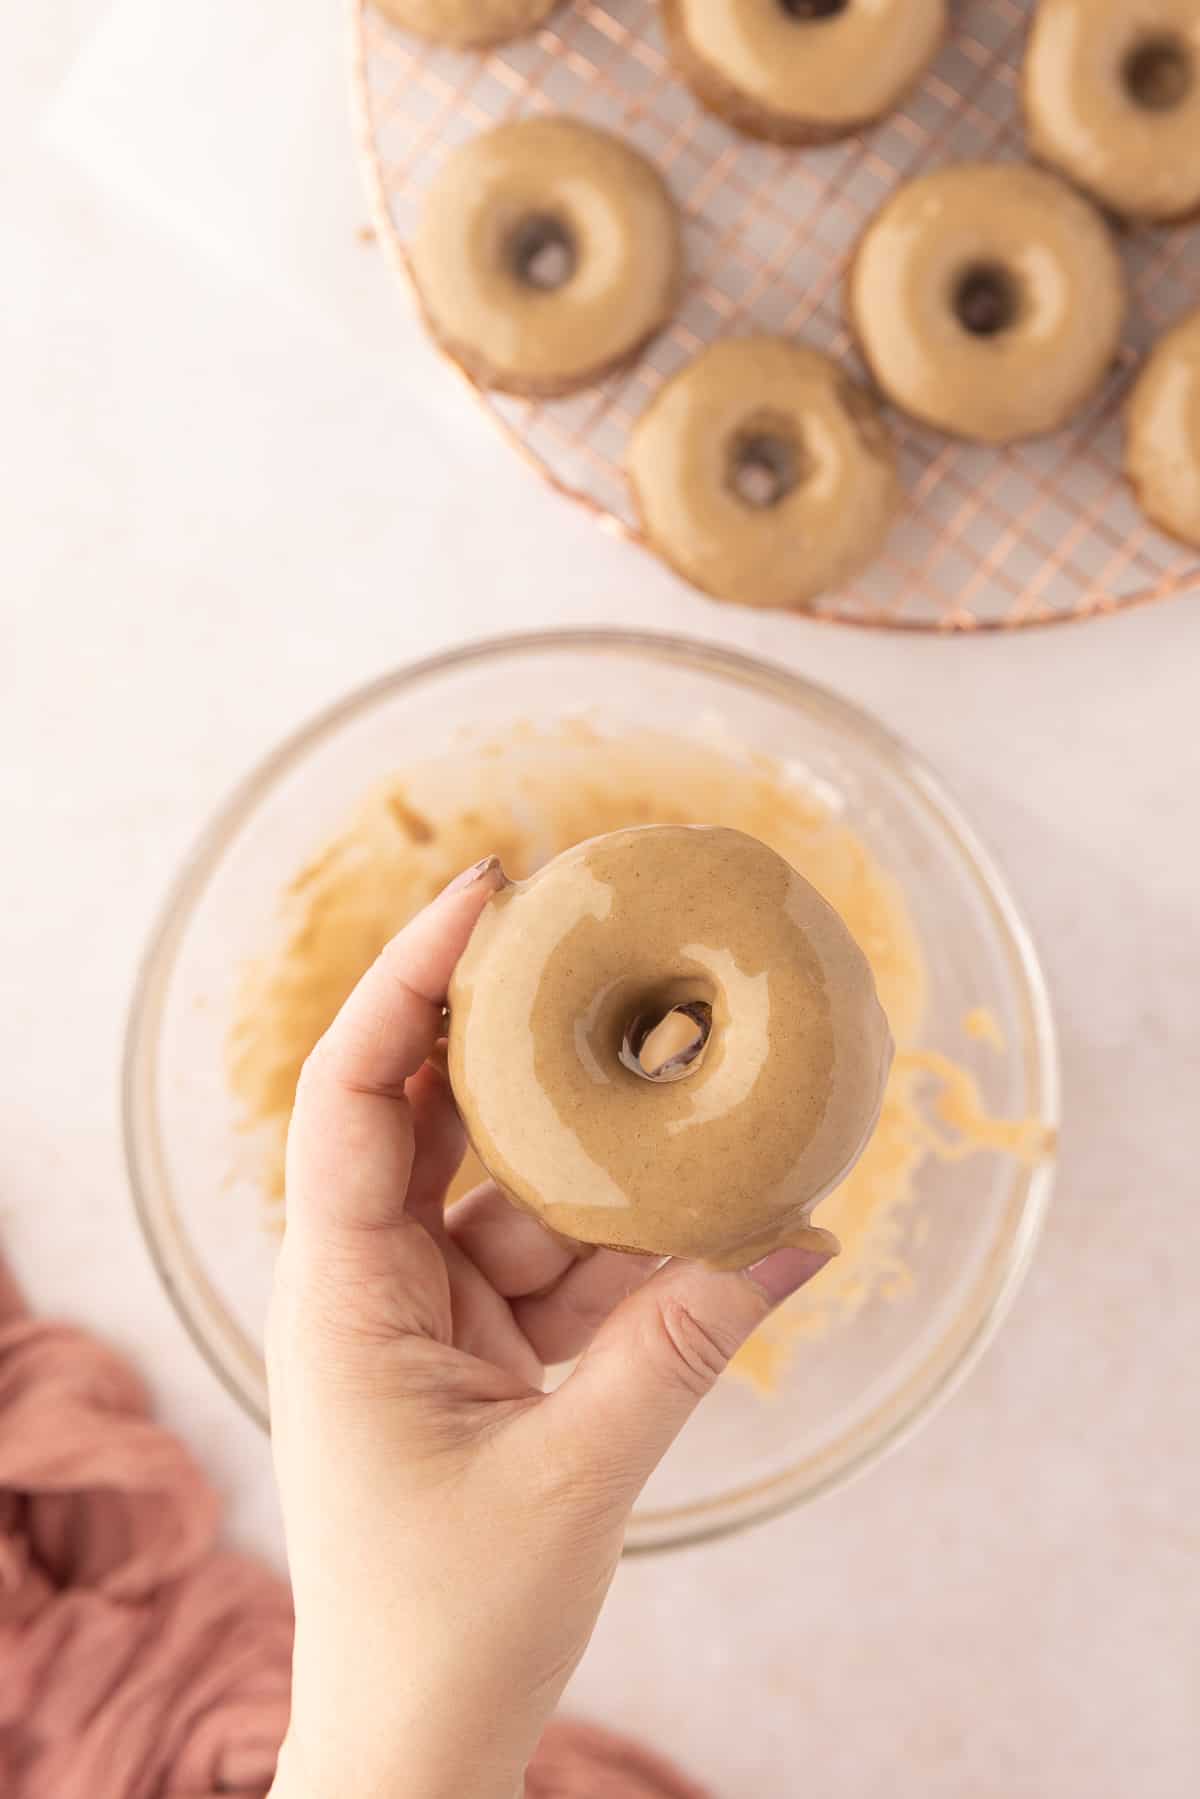 A donut being held up that has just been dipped into a bowl of cinnamon maple glaze under it, with a cooling rack of more donuts in the background.